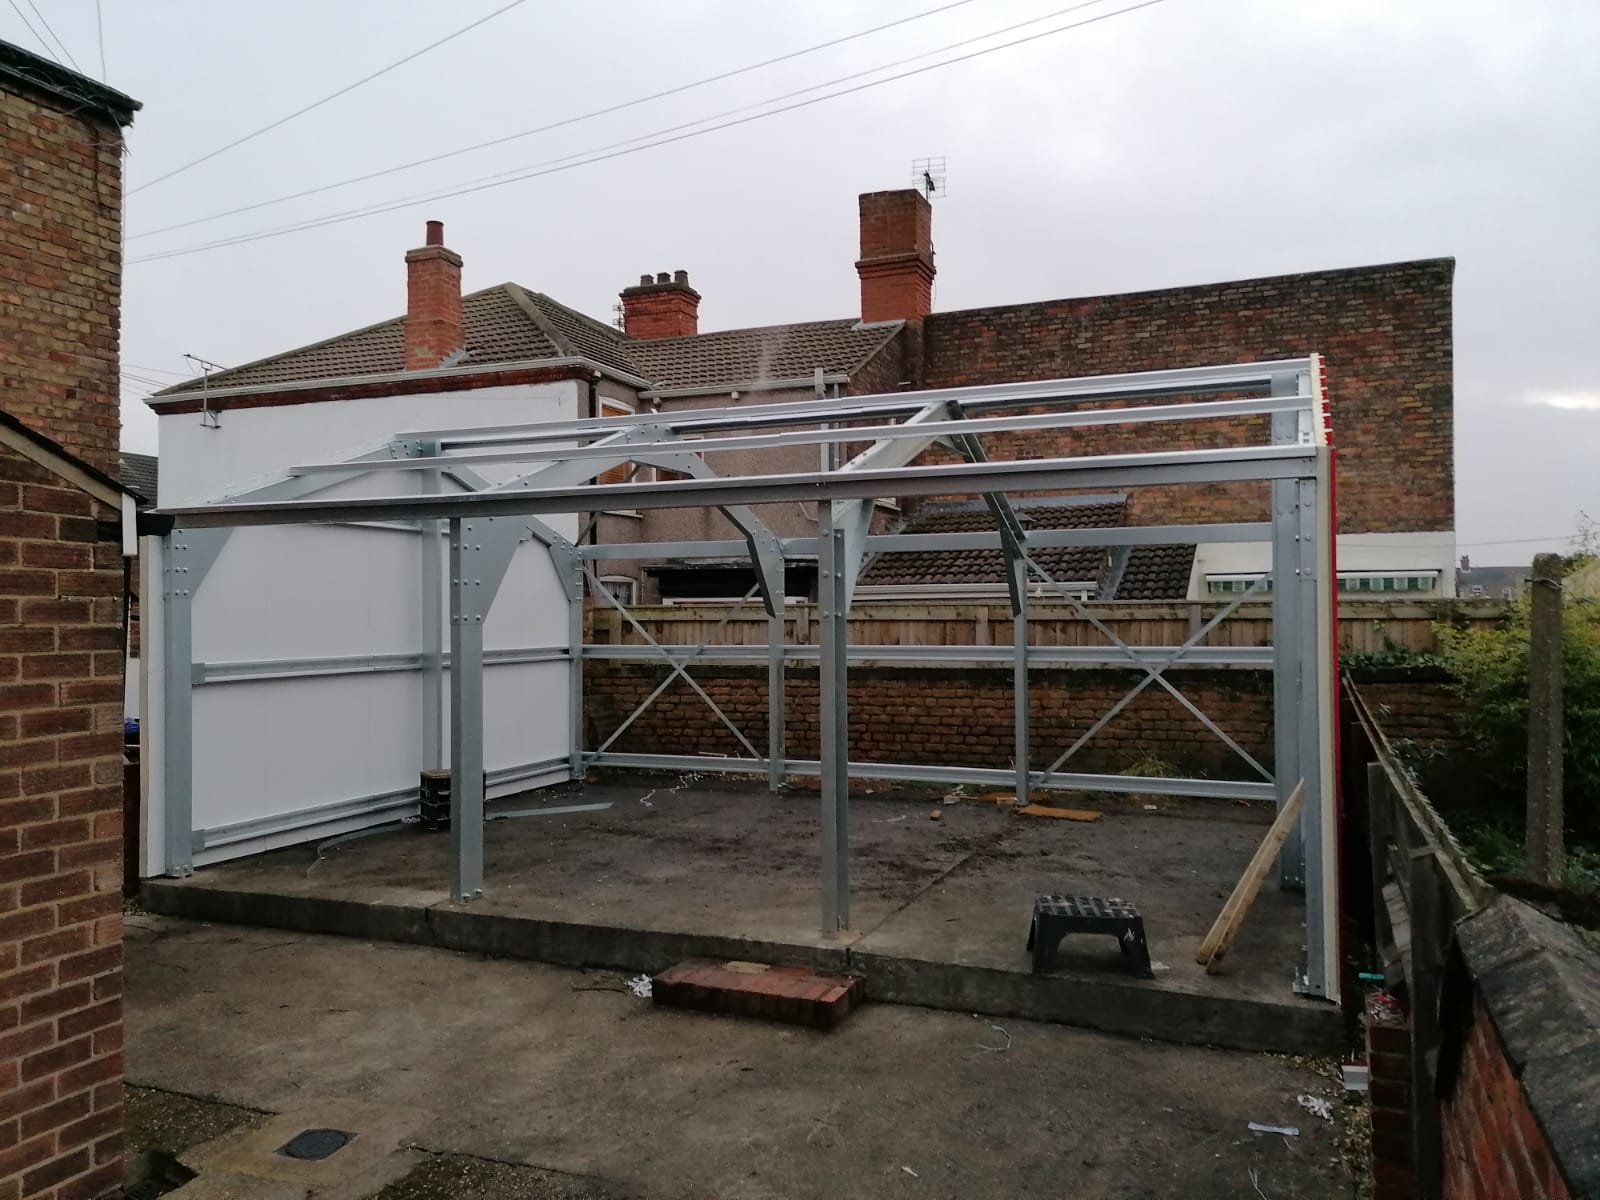 The shed takes shape